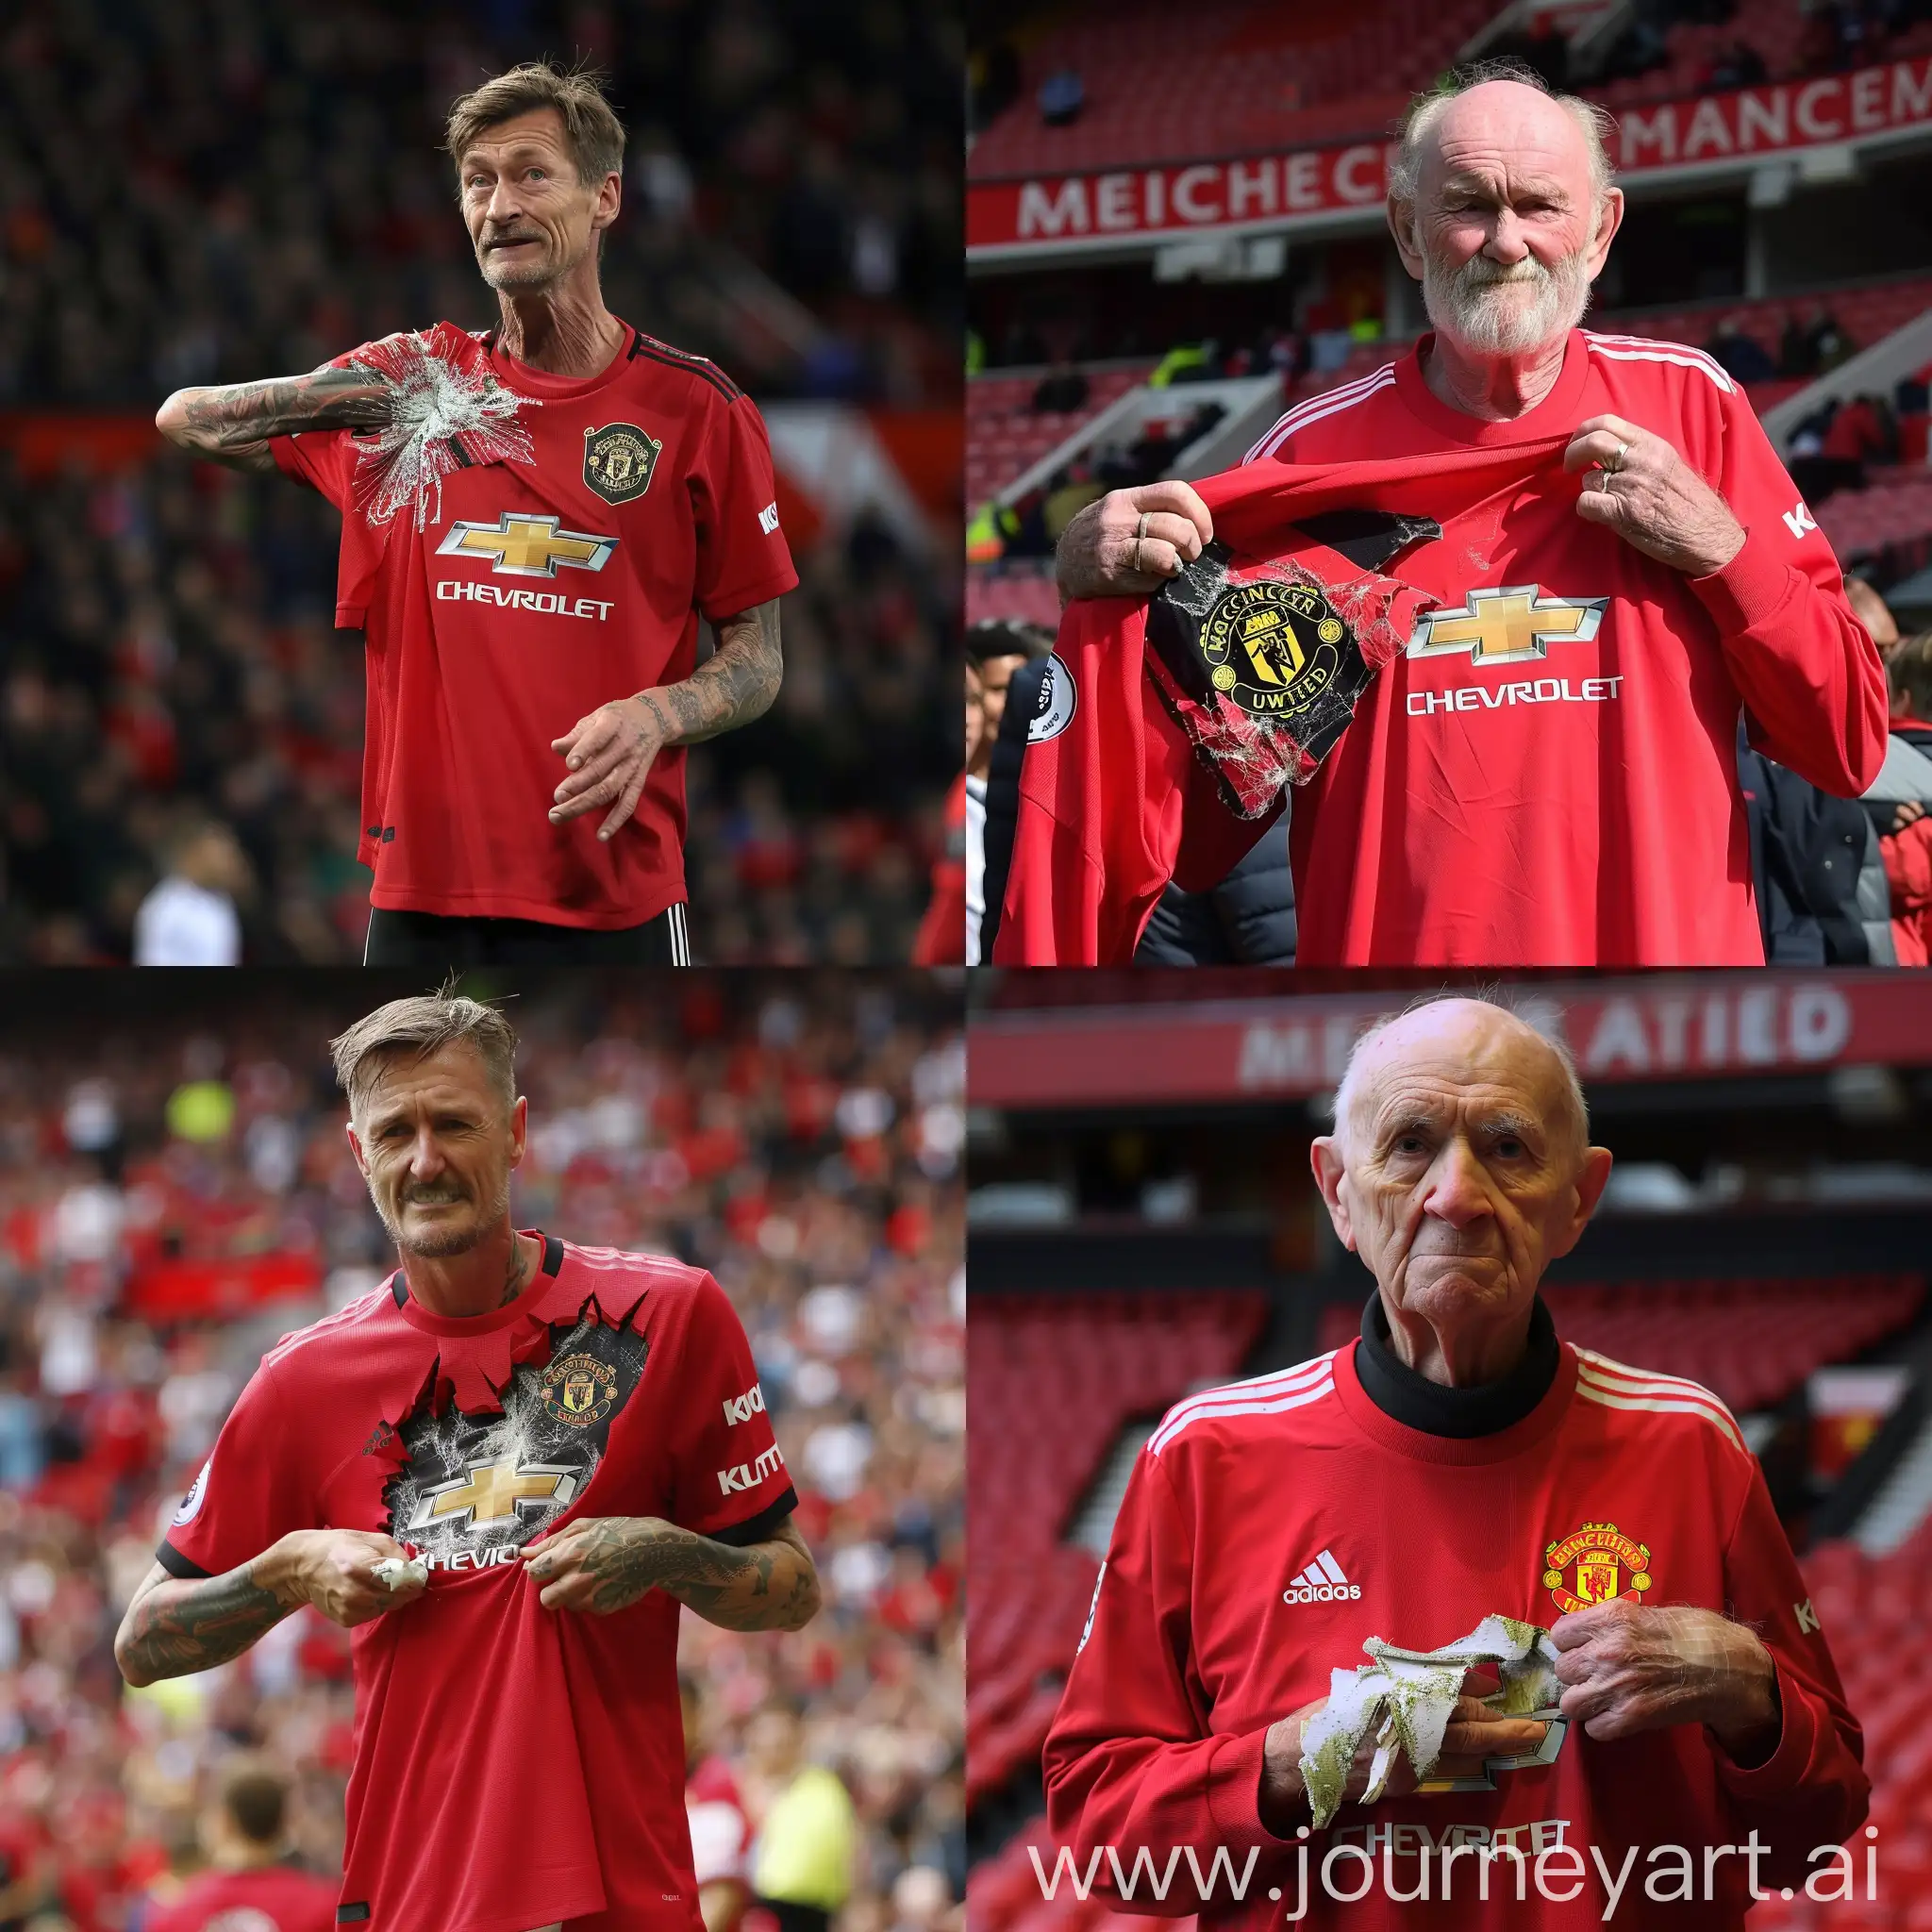 Sir Jim Ratcliffe begging with a ripped up manchester united shirt